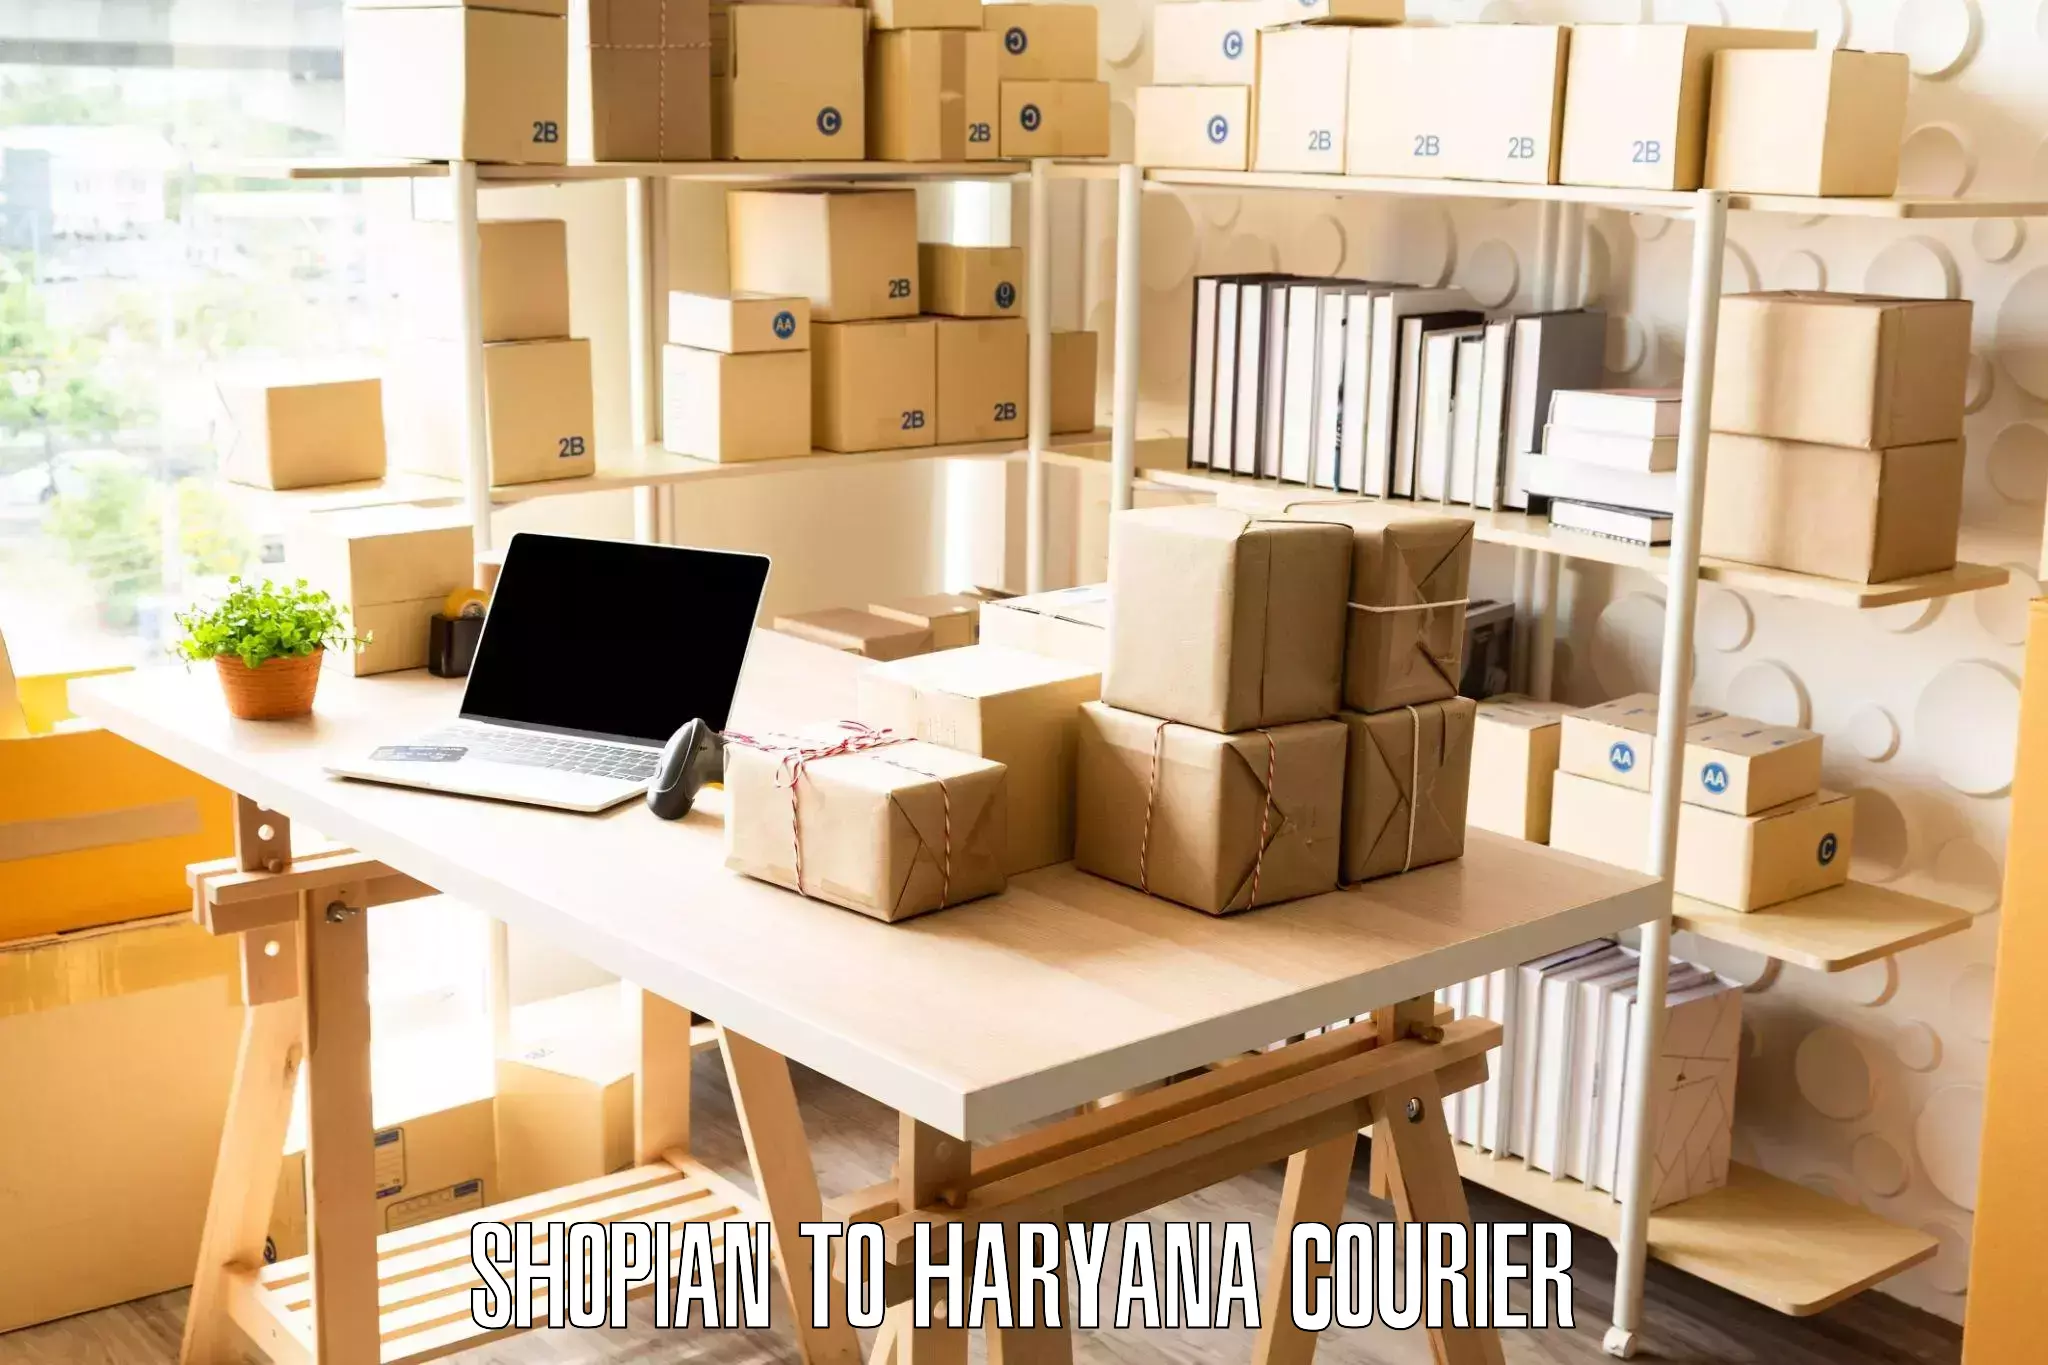 High-quality moving services Shopian to Gurgaon